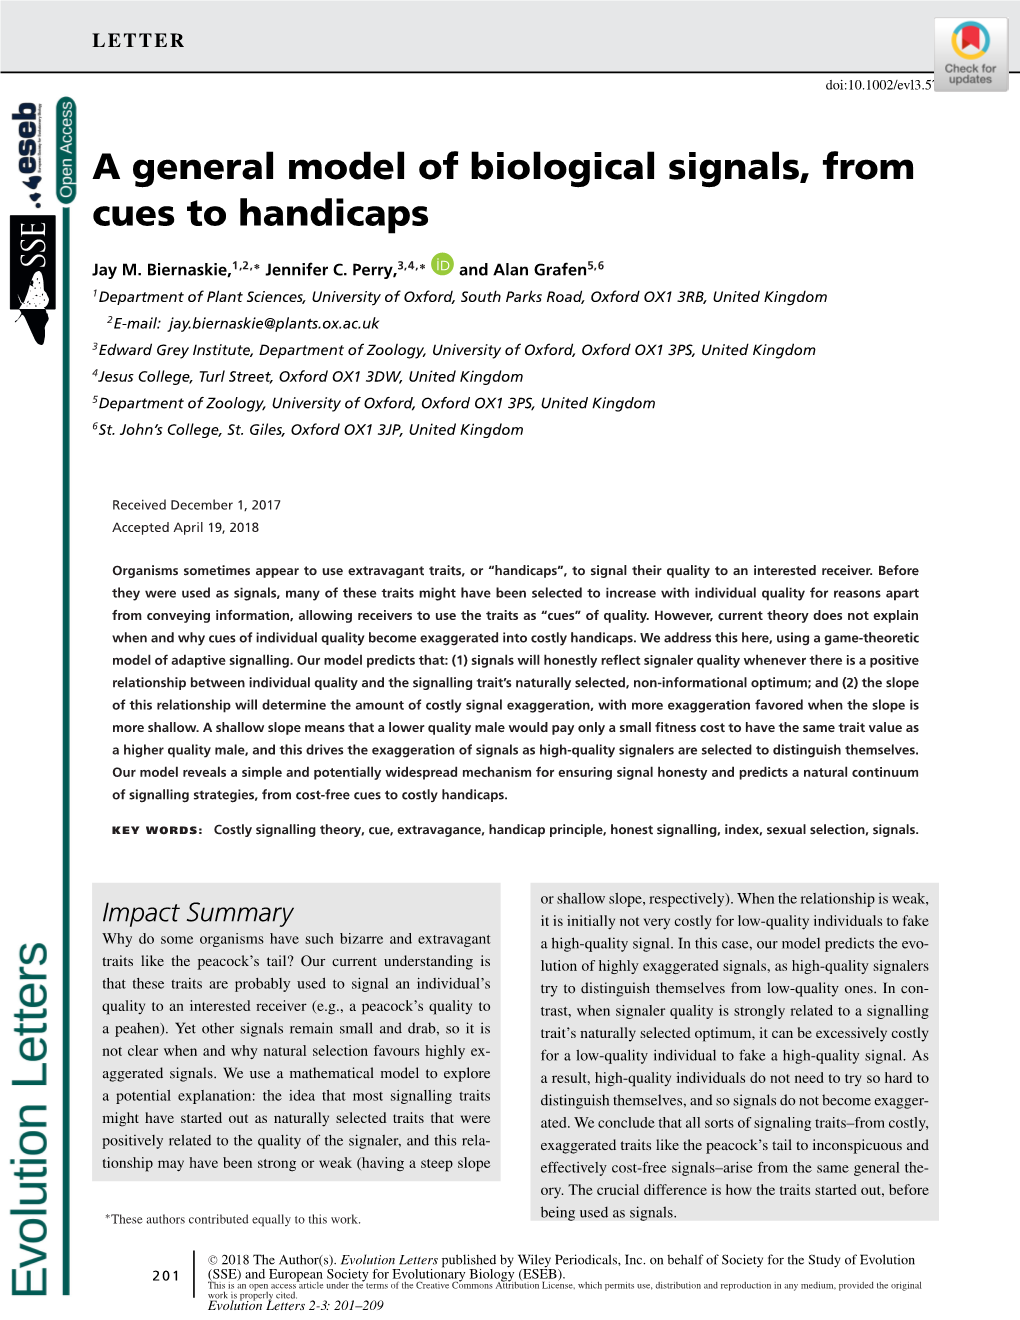 A General Model of Biological Signals, from Cues to Handicaps